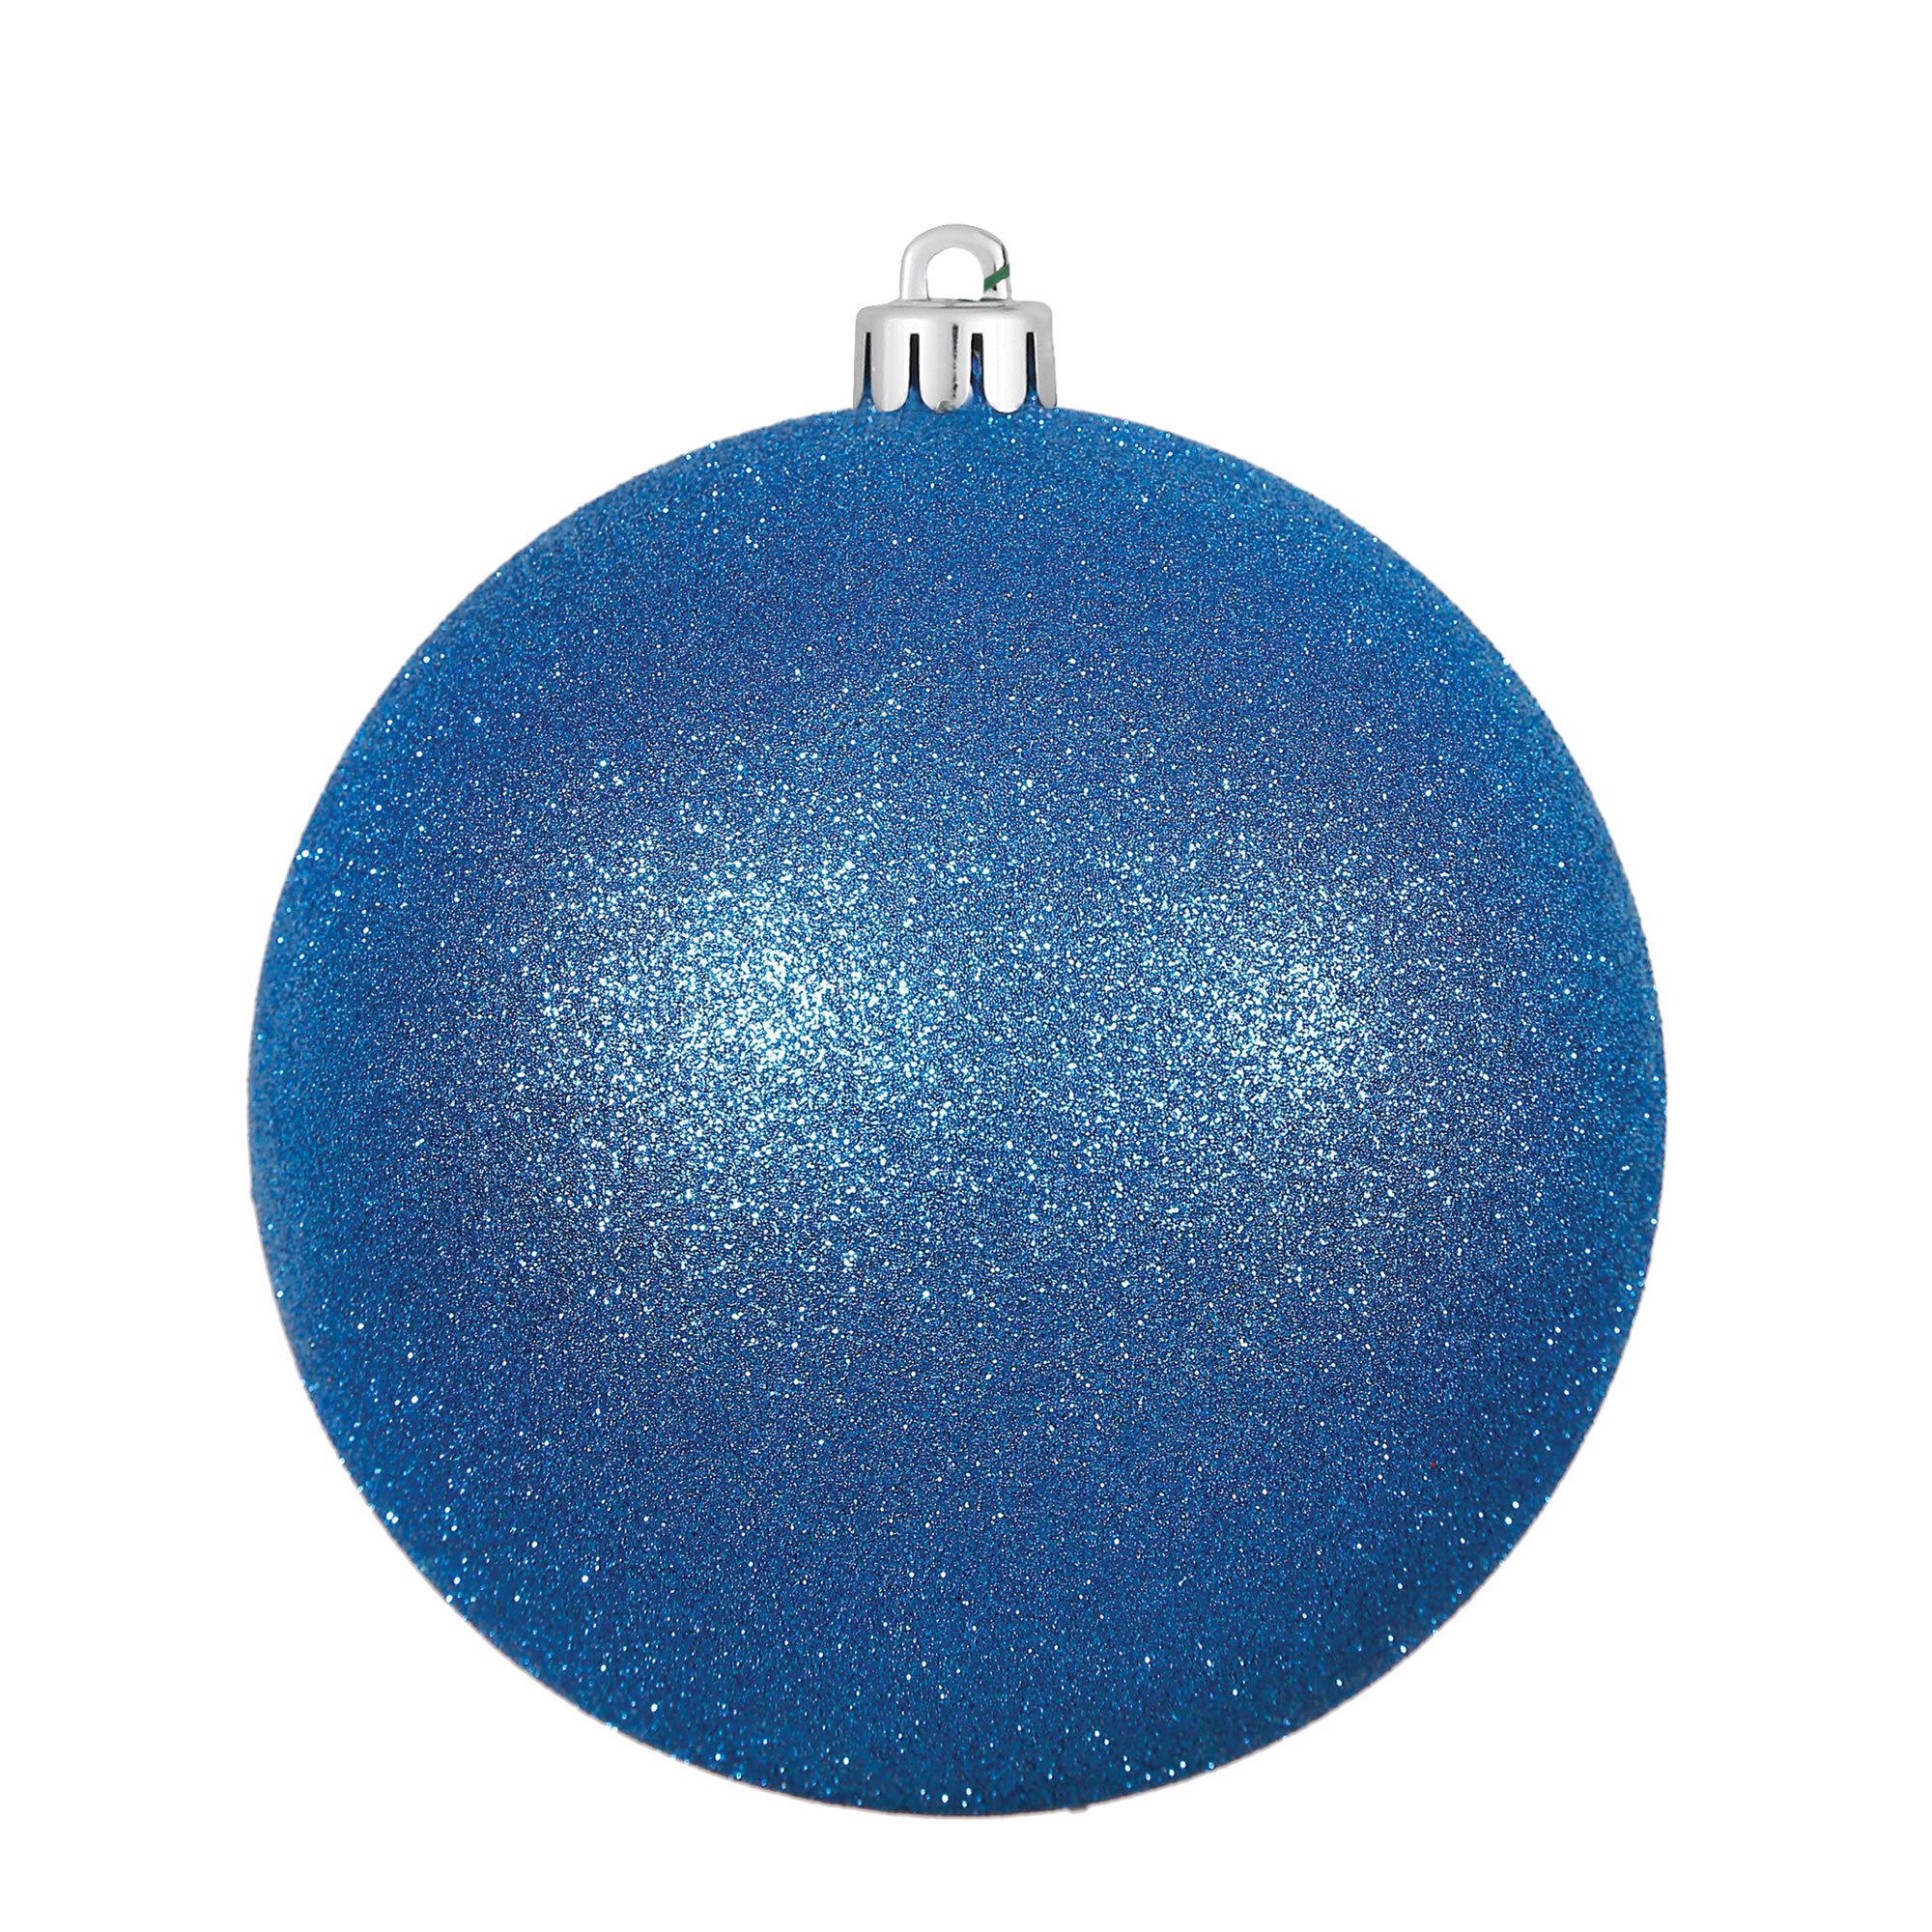 Vickerman 4 Clear Ball Christmas Ornament with Lime Glitter Interior This Item Comes with 6 Ornaments per Unit. 